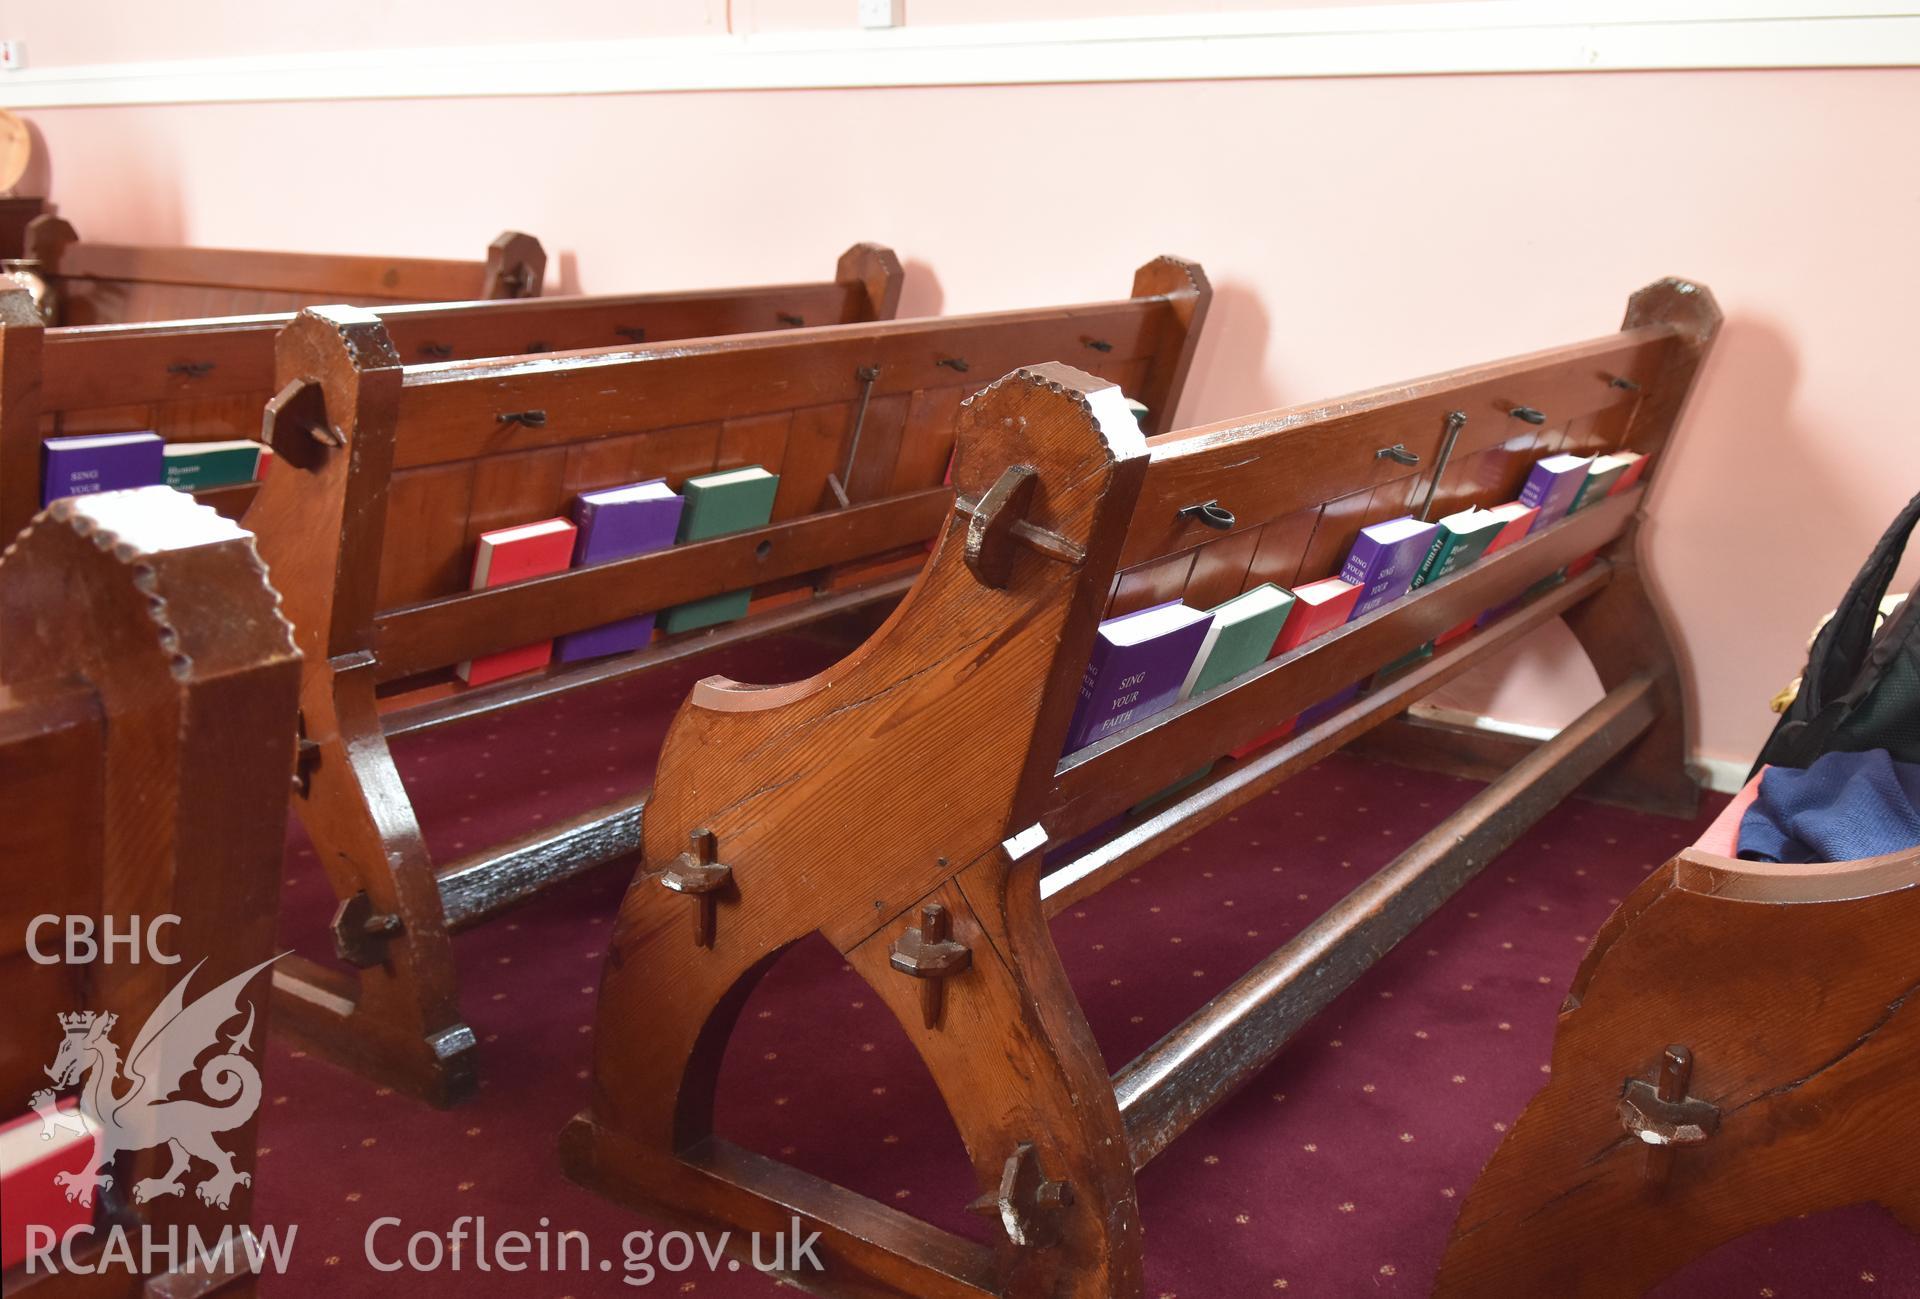 Colour photograph showing detail of wooden pews at the Baptist & Unitarian Chapel, Nottage, Porthcawl. Taken during photographic survey conducted by Sue Fielding on 12th May 2018.